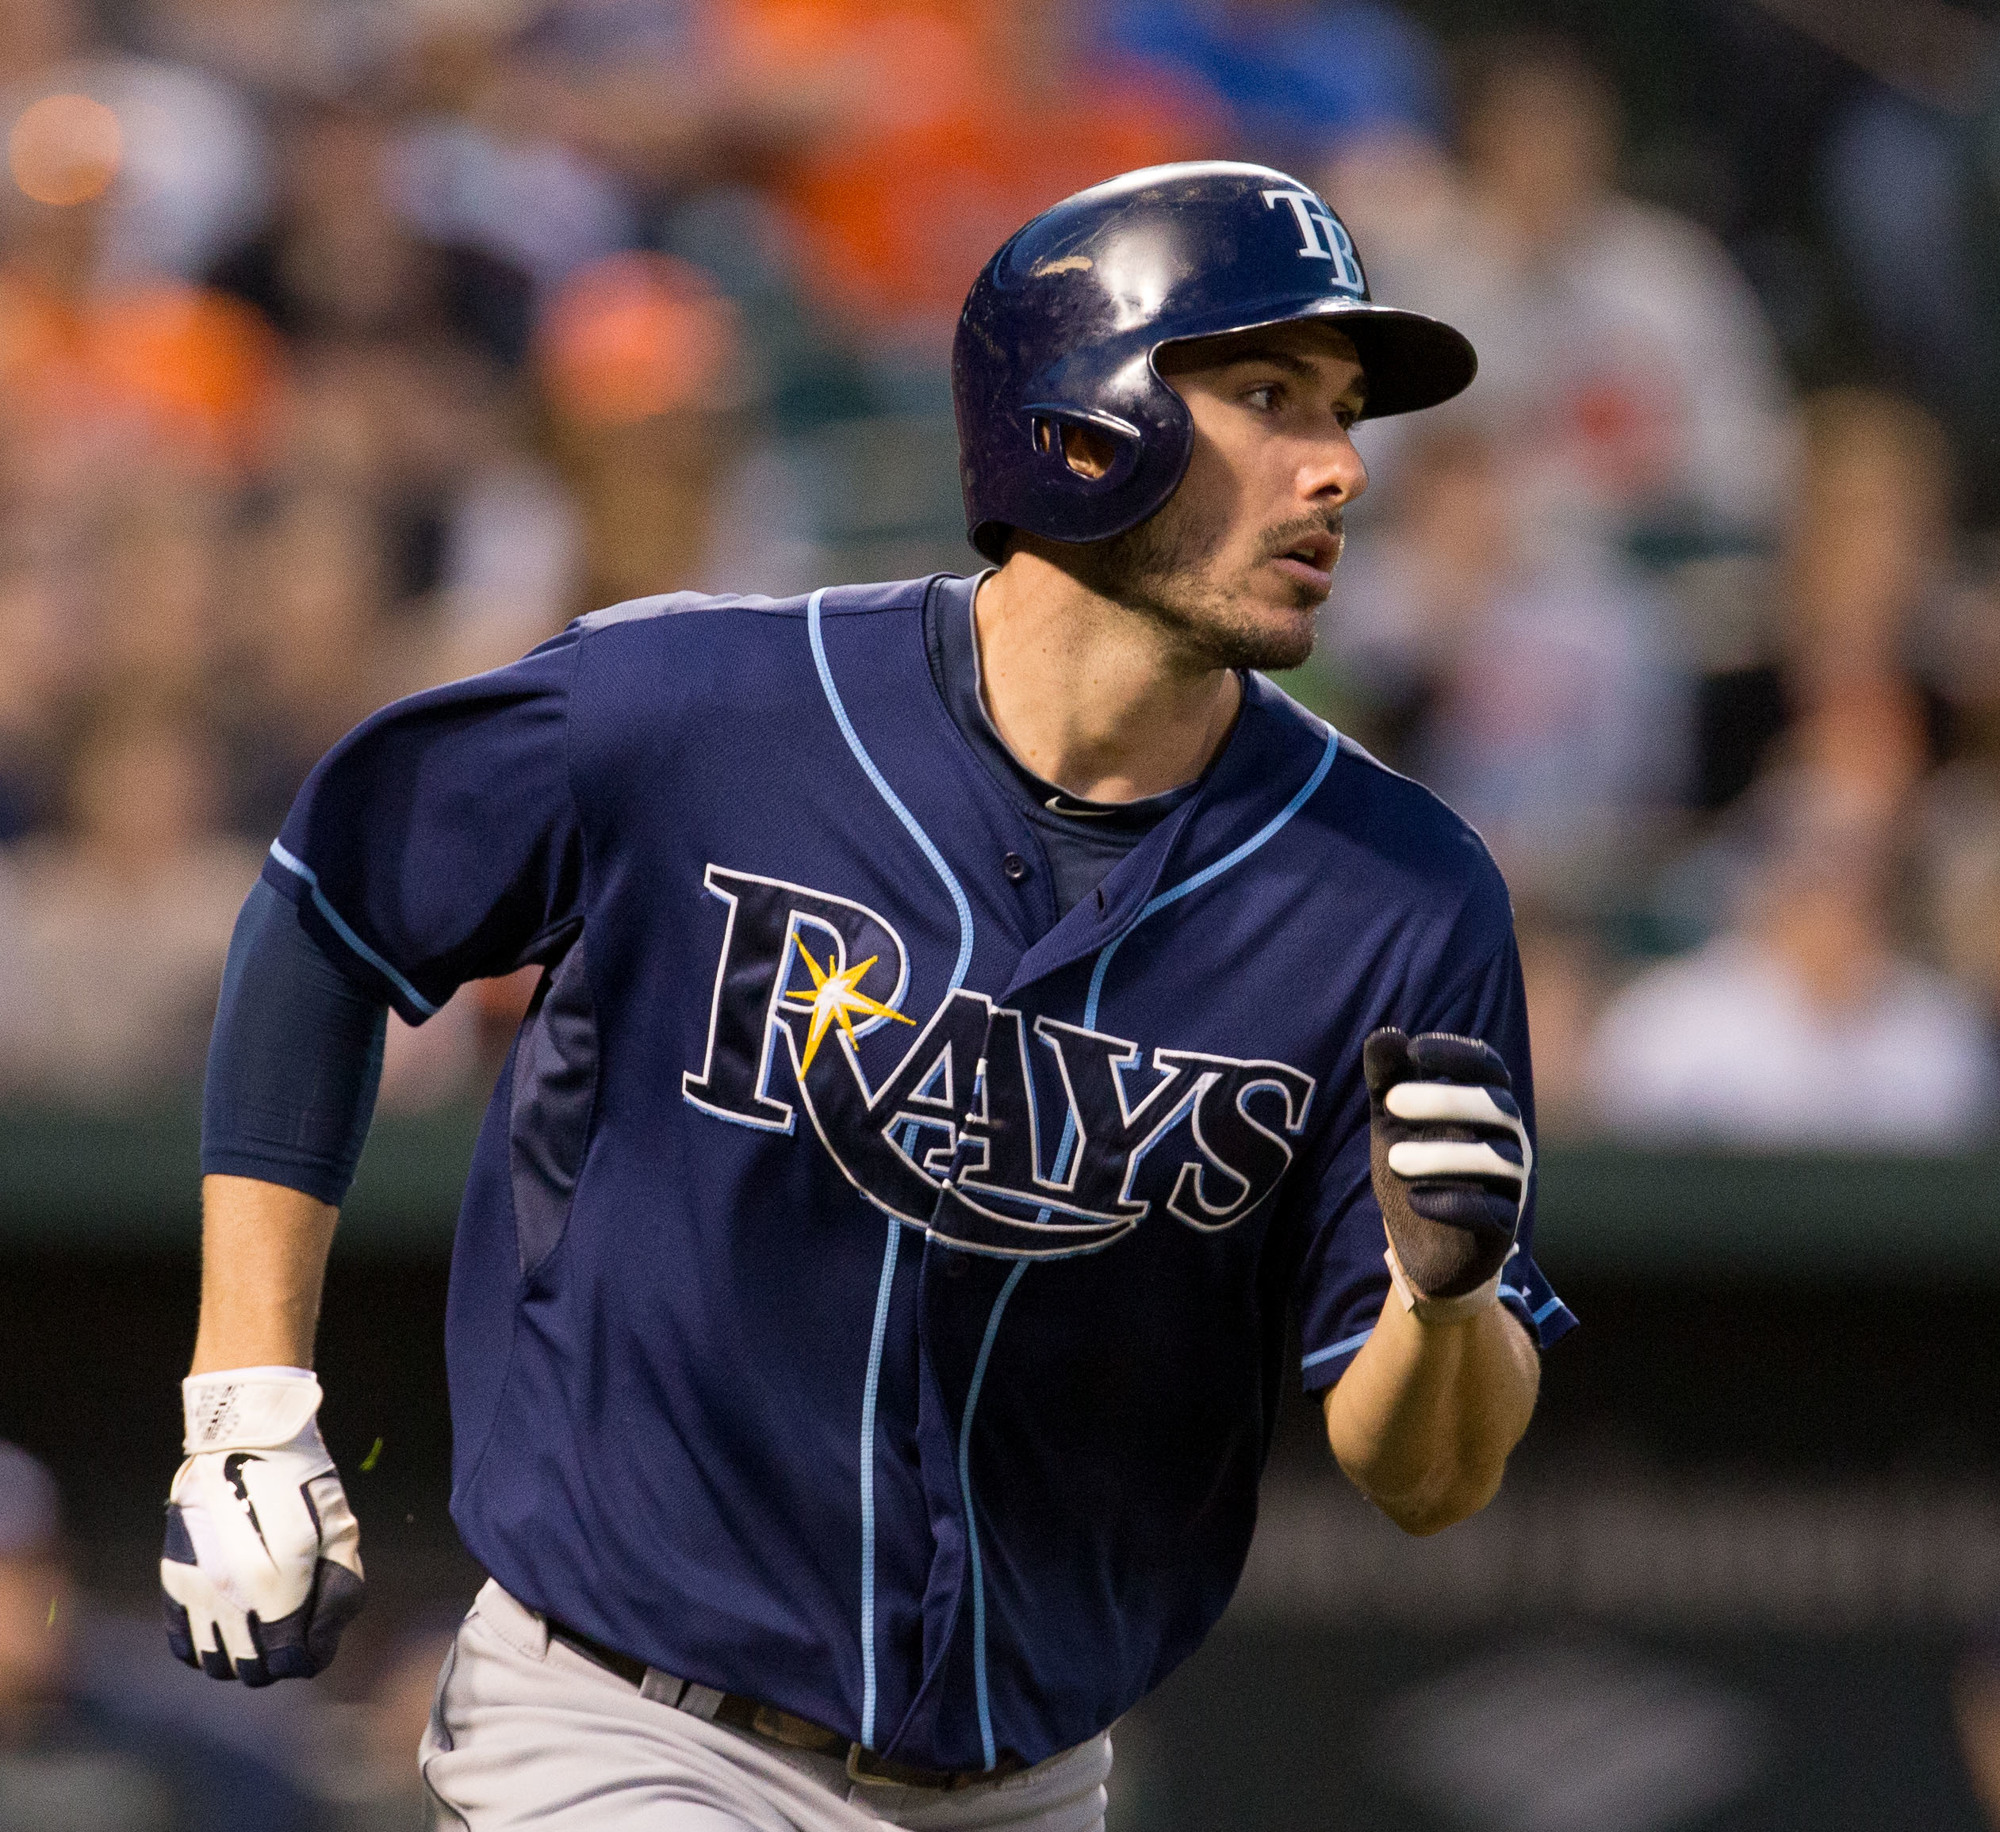 Matt Joyce spent some of the best seasons of his career with the Tampa Bay Rays, earning selection to the Major League Baseball All-Star team in 2011. Photo courtesy of Wikimedia Commons/Keith Allison.